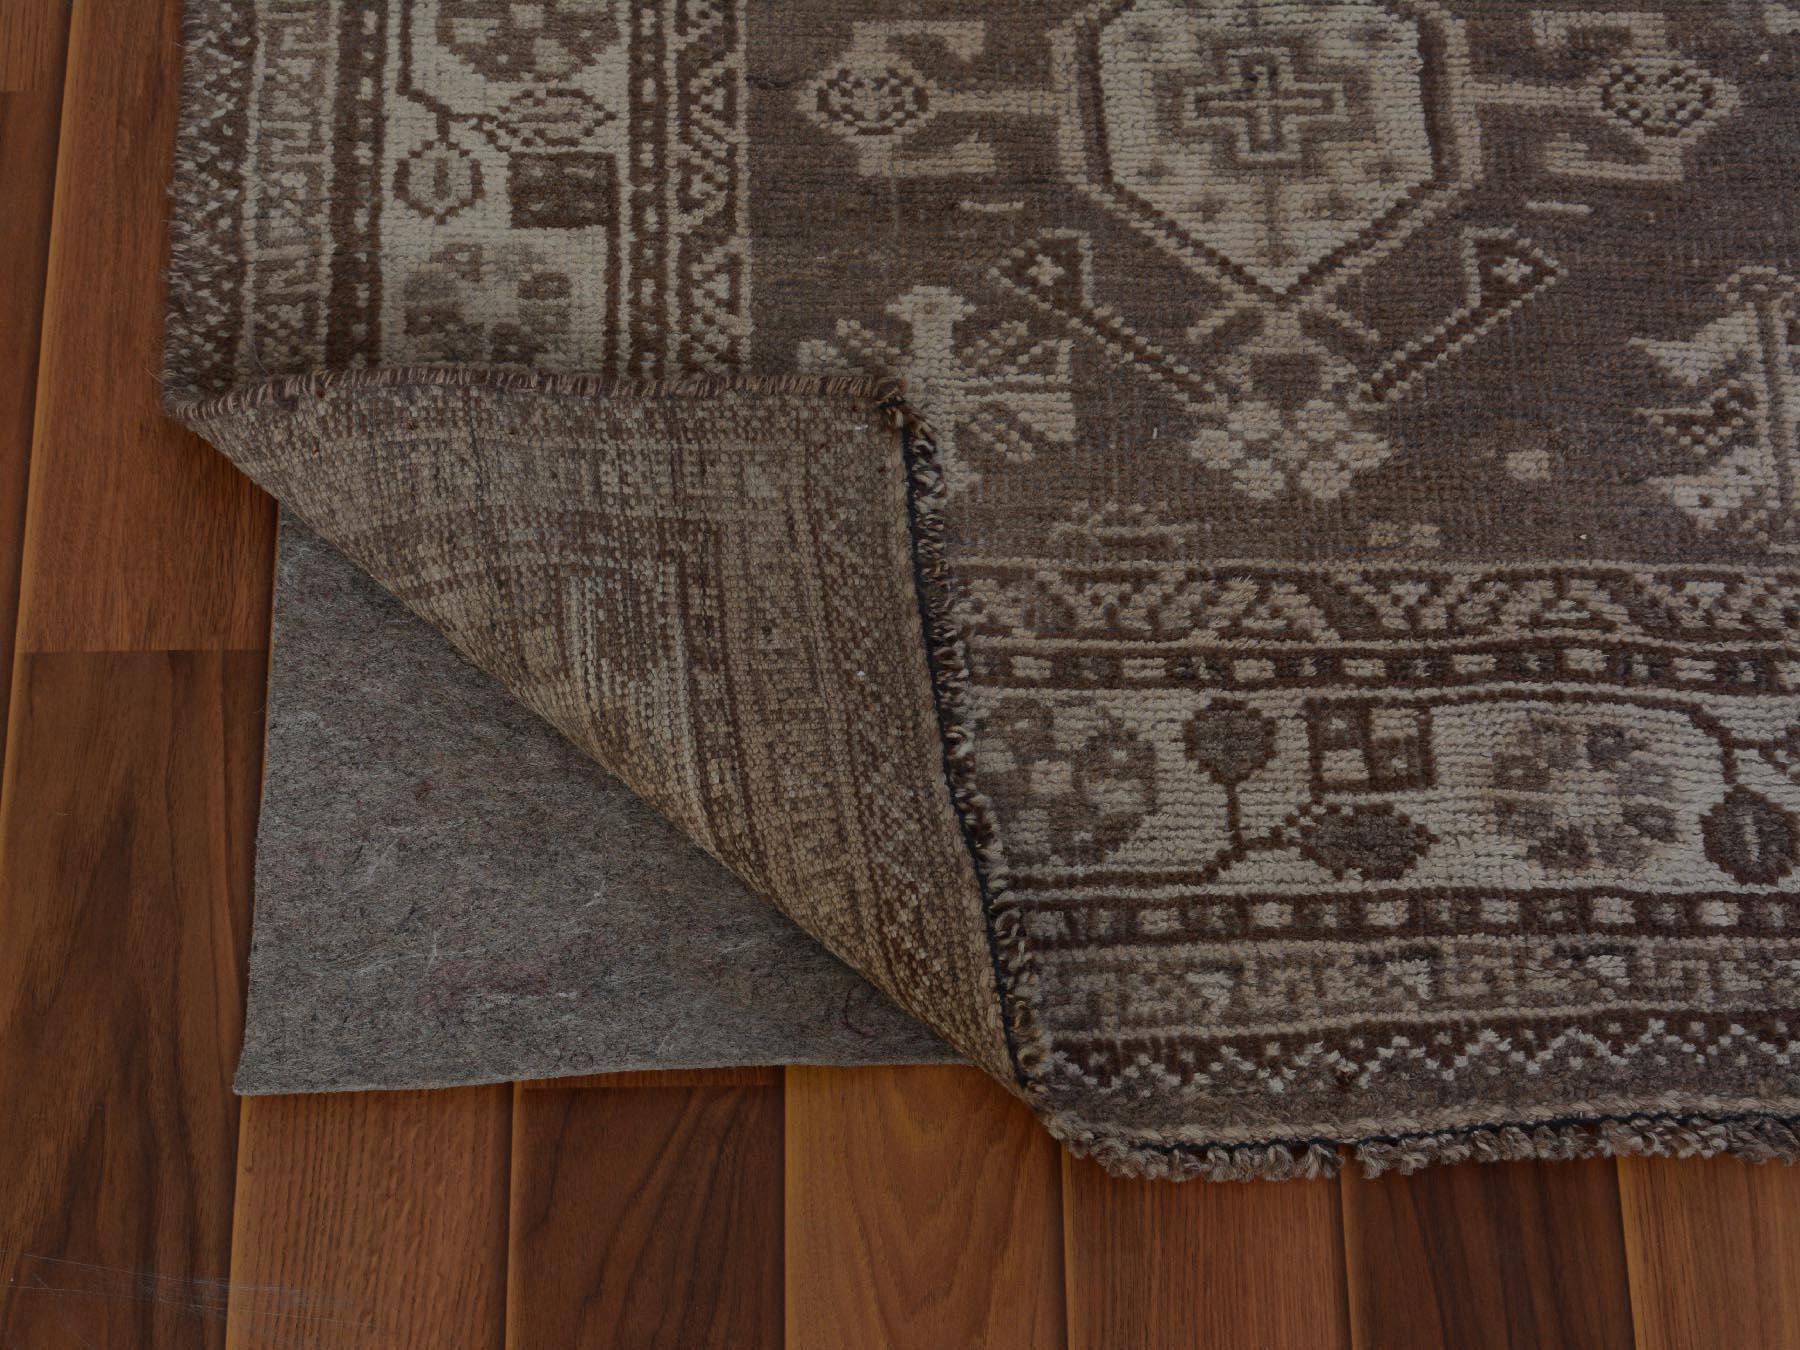 Medieval Beige Worn Down and Old Persian Qashqai Pure Wool Hand Knotted Oriental Rug For Sale